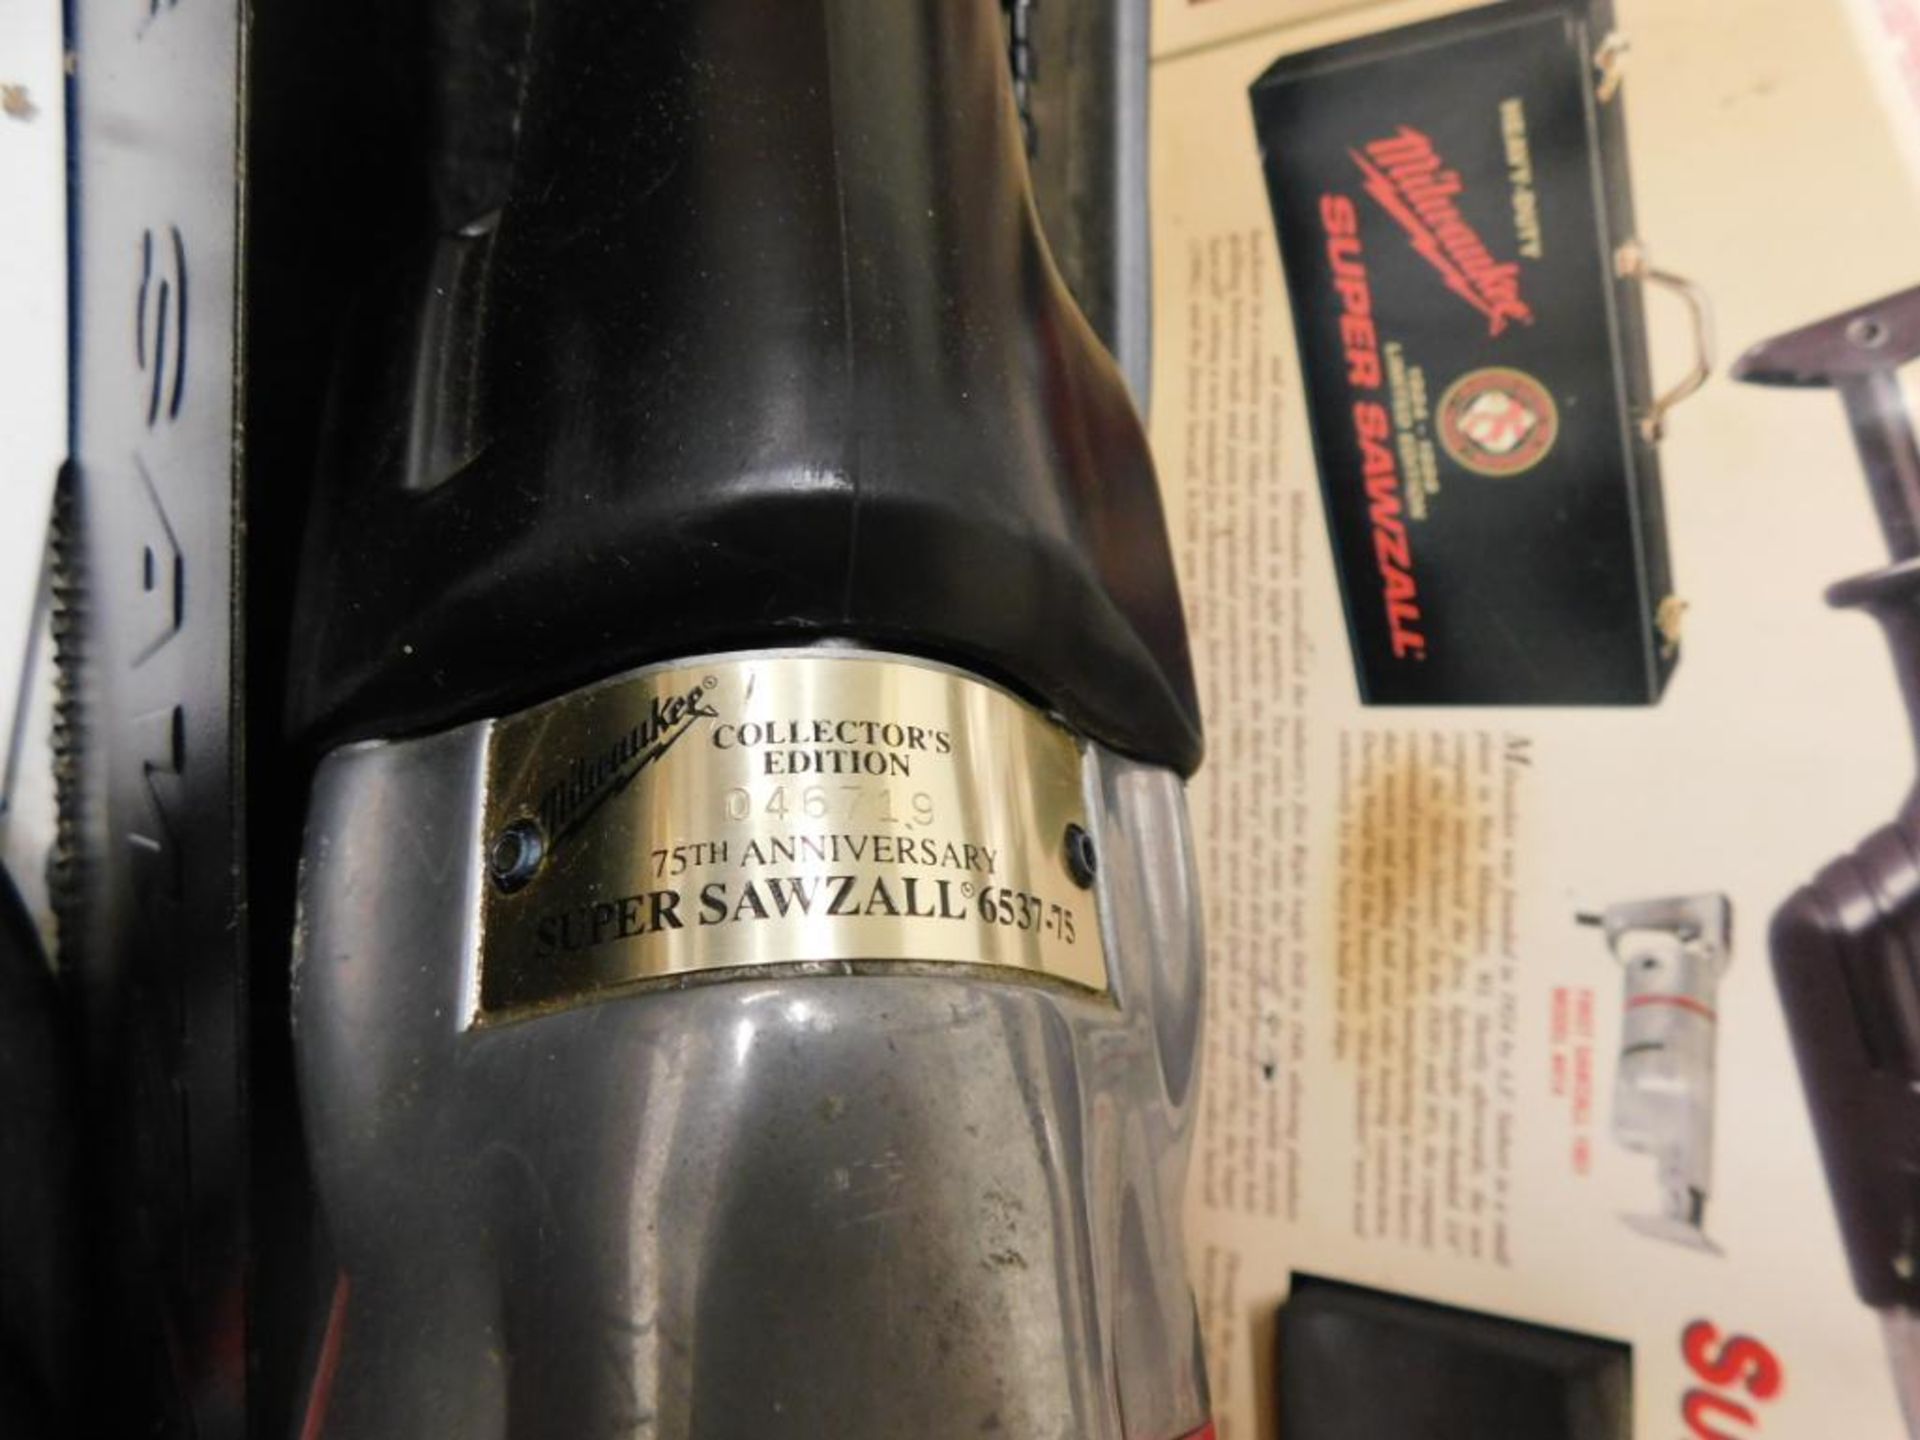 Milwaukee Heavy Duty Super Sawzall Model 1924-999 Limited Edition, Collectors Edition 046719 (LOCATE - Image 3 of 3